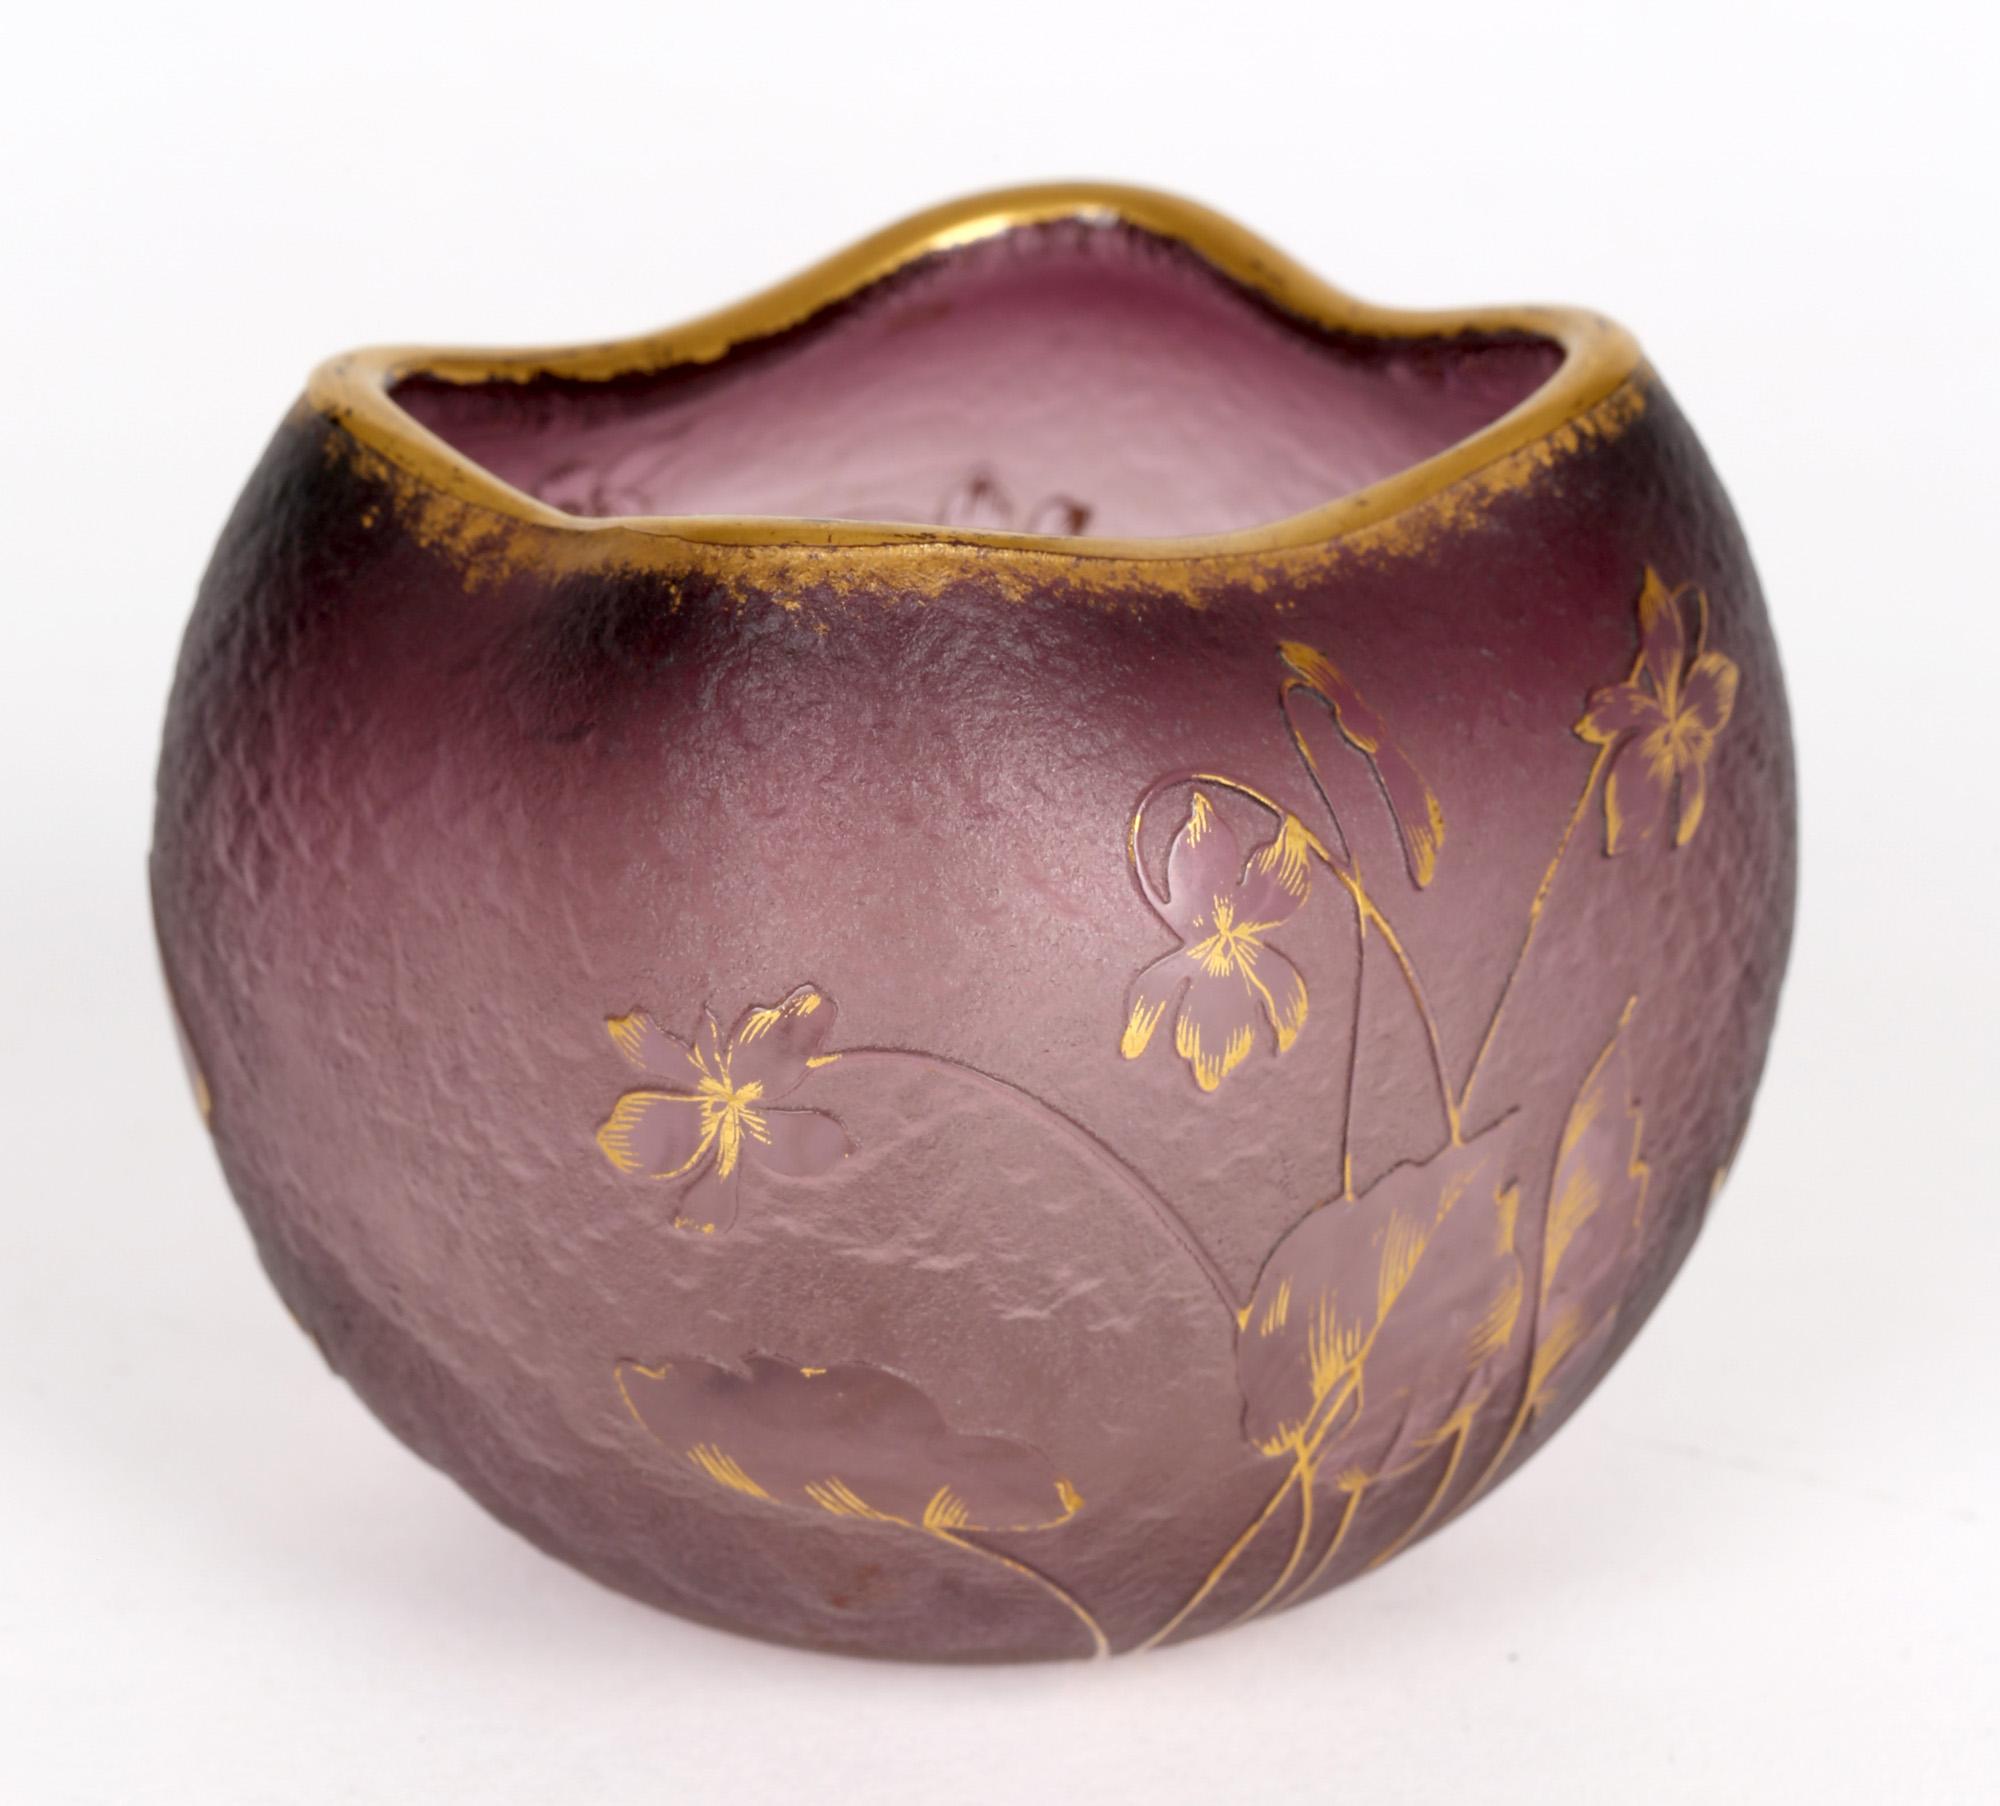 An exceptional French Art Nouveau Daum Frères cameo glass vase wheel cut with raised floral designs dating from around 1900. The vase is of square rounded shape and made in a pale amethyst color with a textured opaque matted body and with the raised